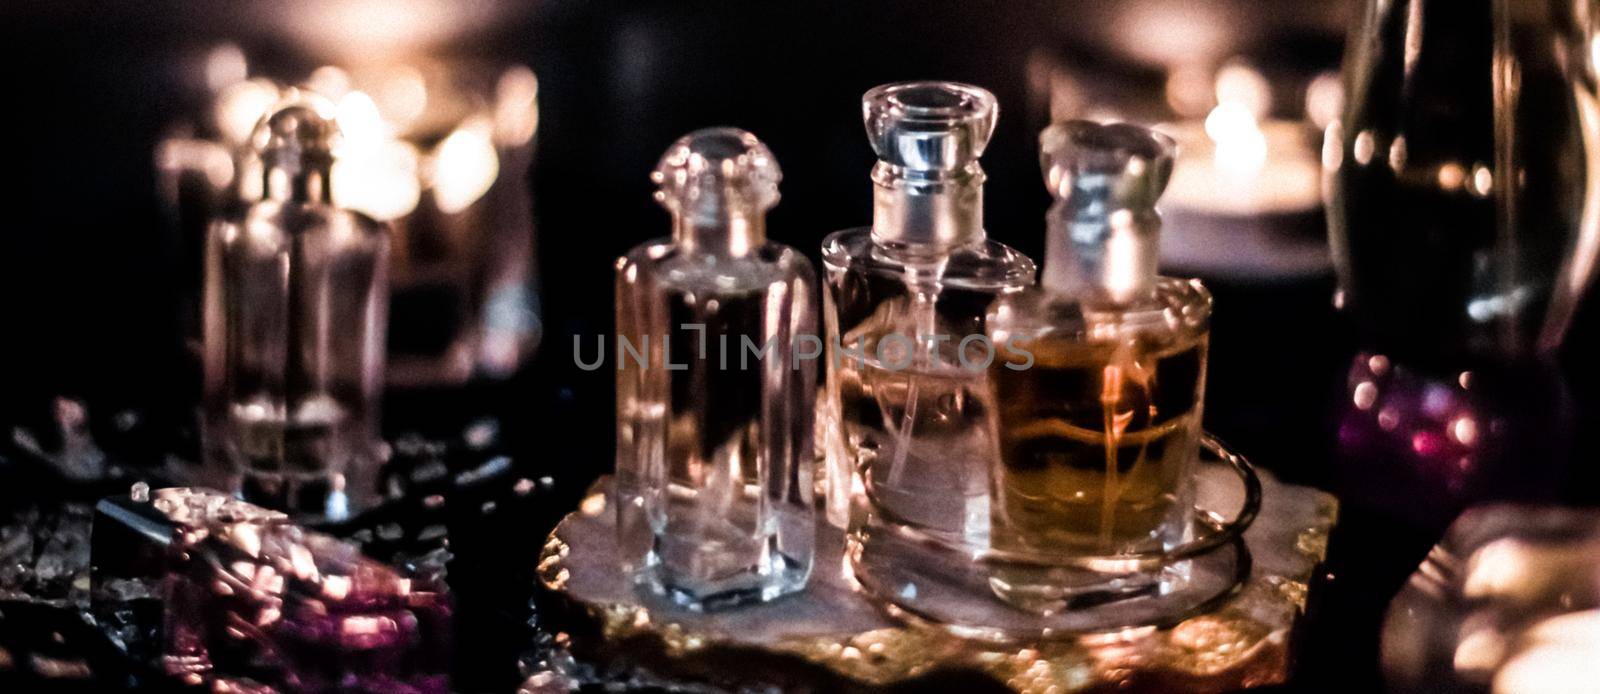 Perfume bottles and vintage fragrance at night, aroma scent, fragrant cosmetics and eau de toilette as luxury beauty brand, holiday fashion parfum design by Anneleven